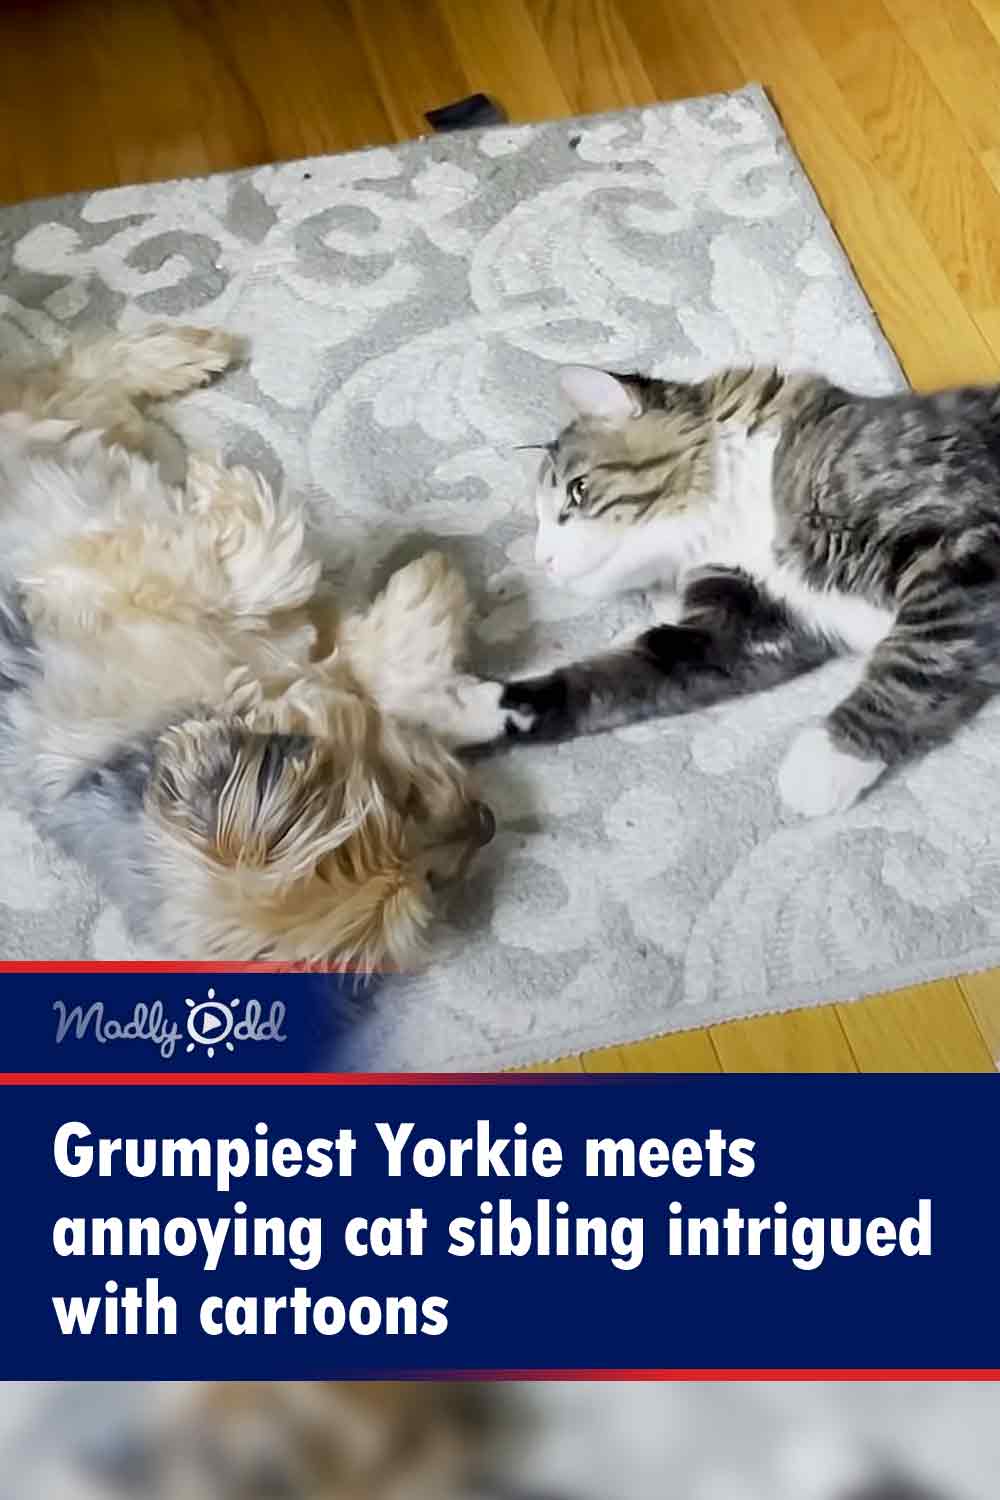 Grumpiest Yorkie meets annoying cat sibling intrigued with cartoons